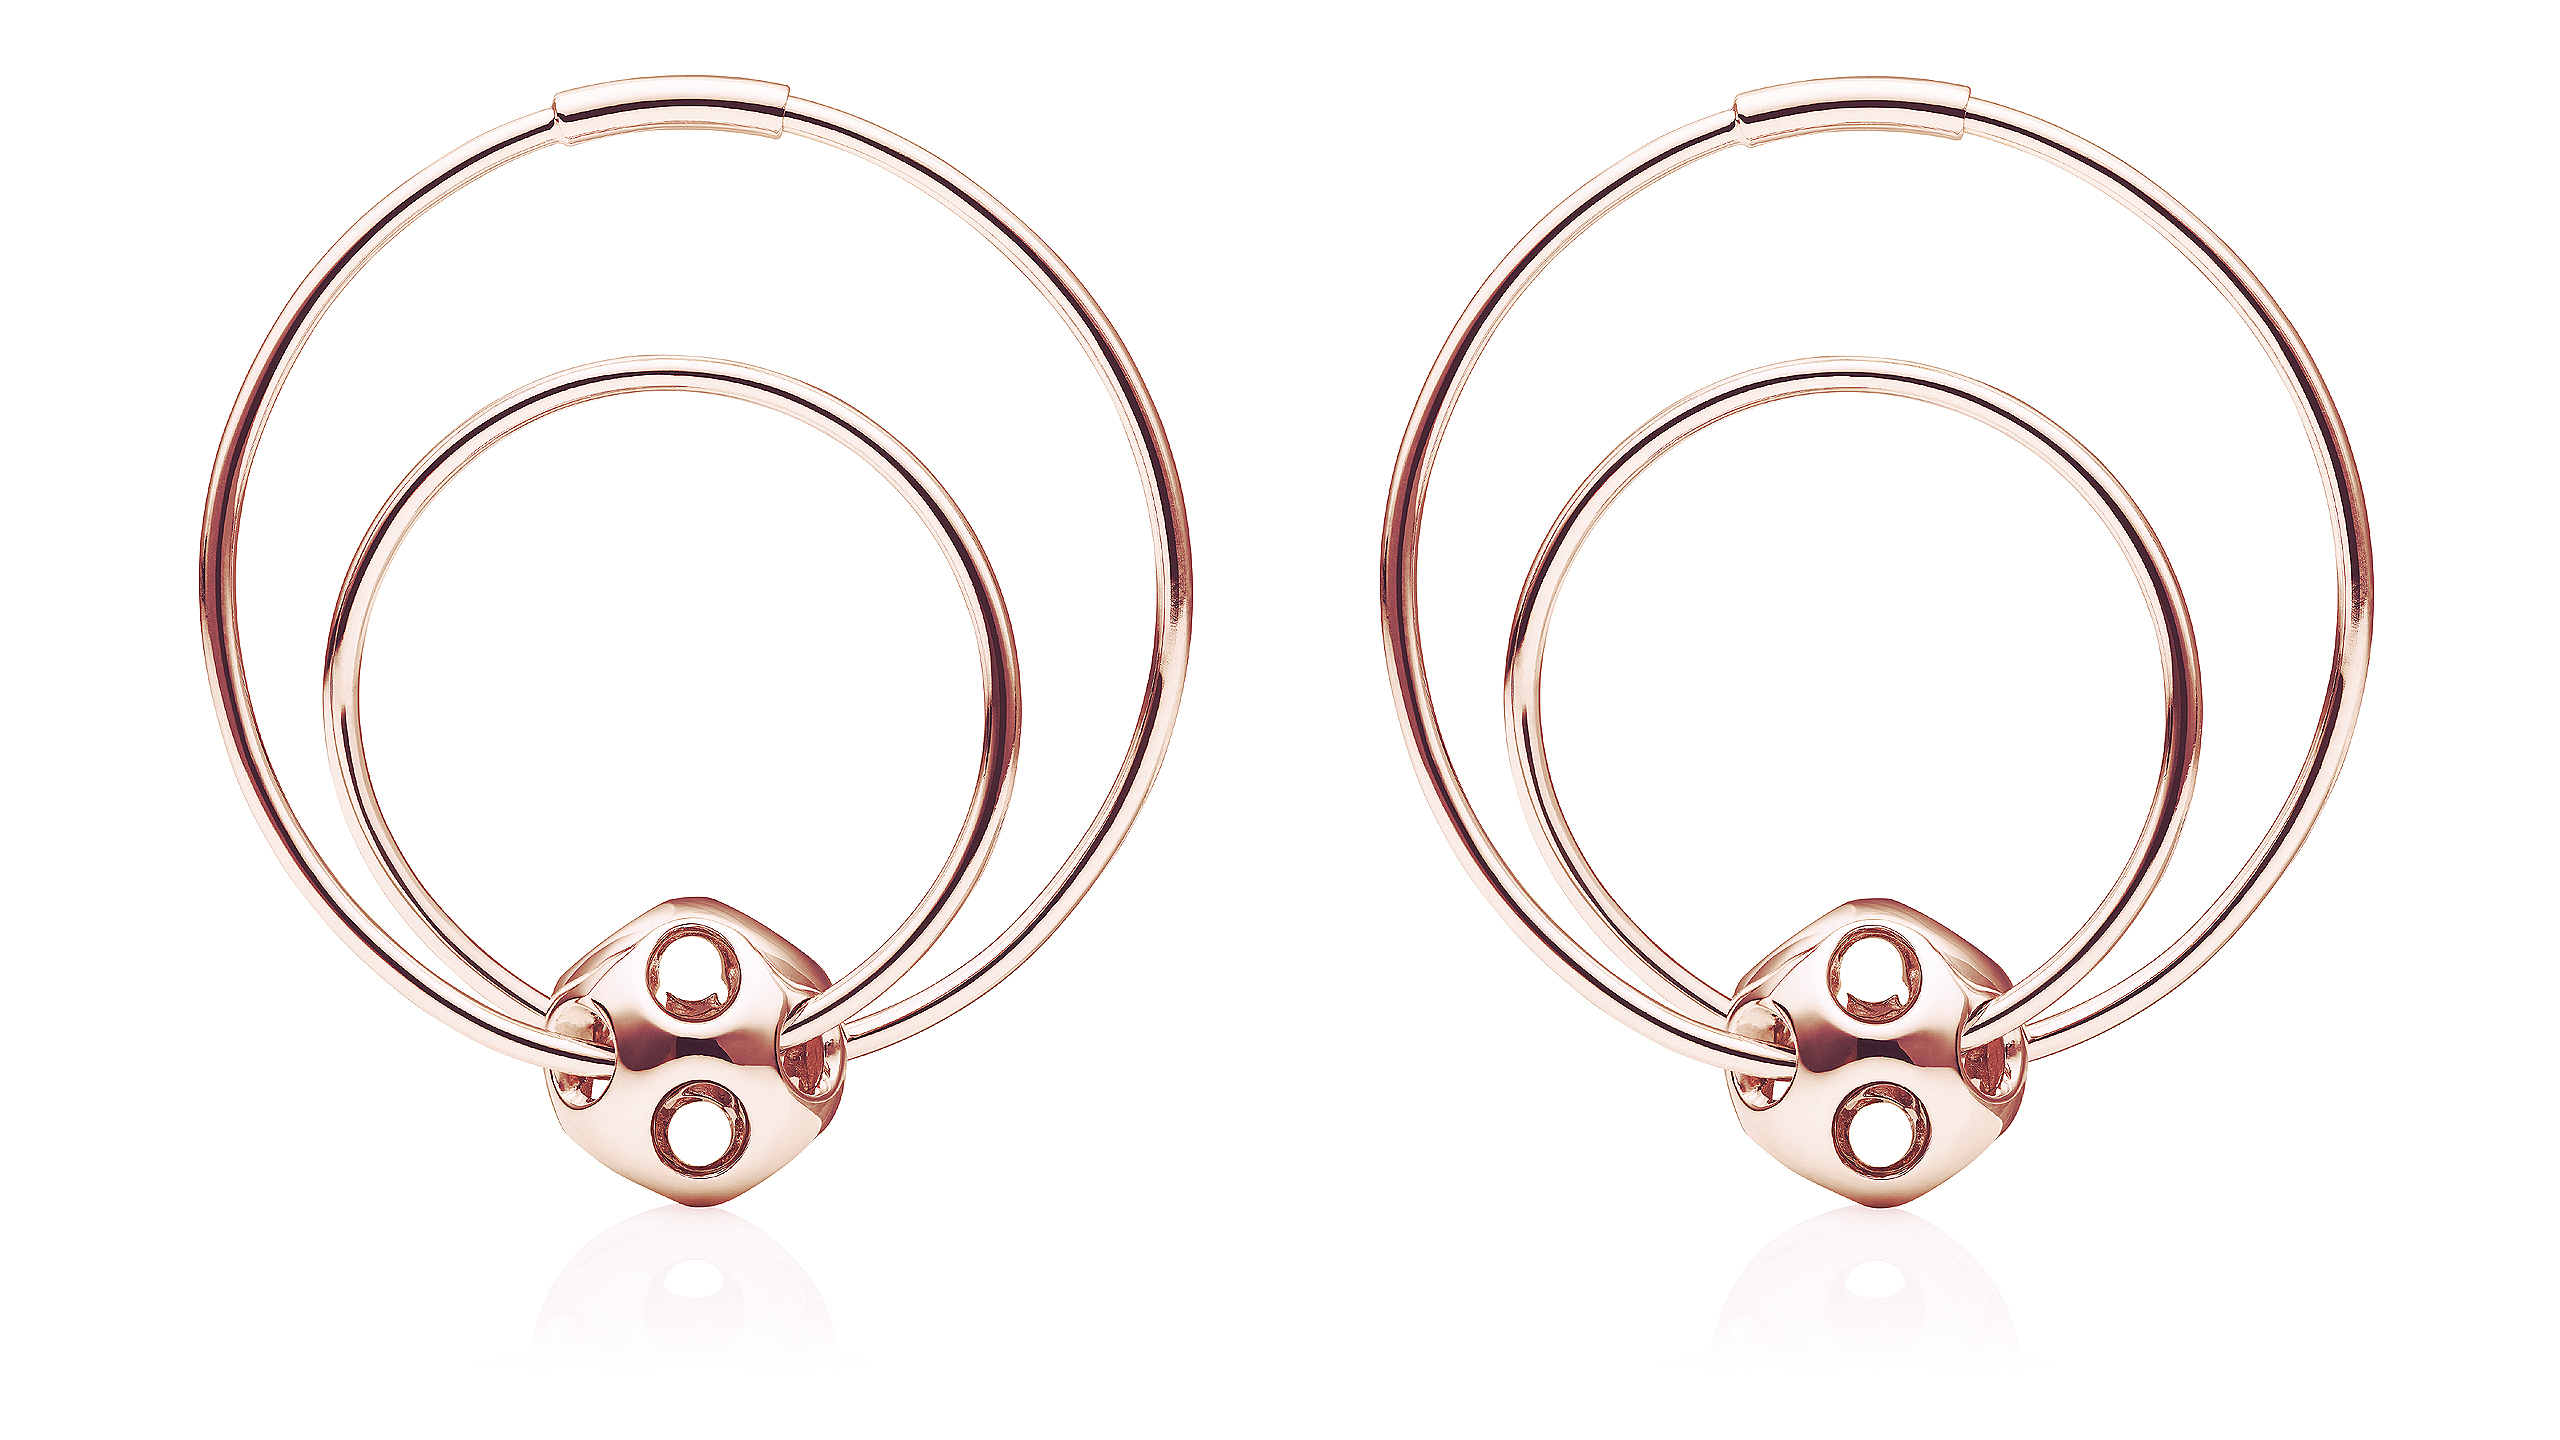 https://towejewels.com/wp-content/uploads/2015/11/TOWE_magic_earr_W_Gold2015-10-18-17.13.07_OK_pink_AB_2560x1440_sideview_web.jpg